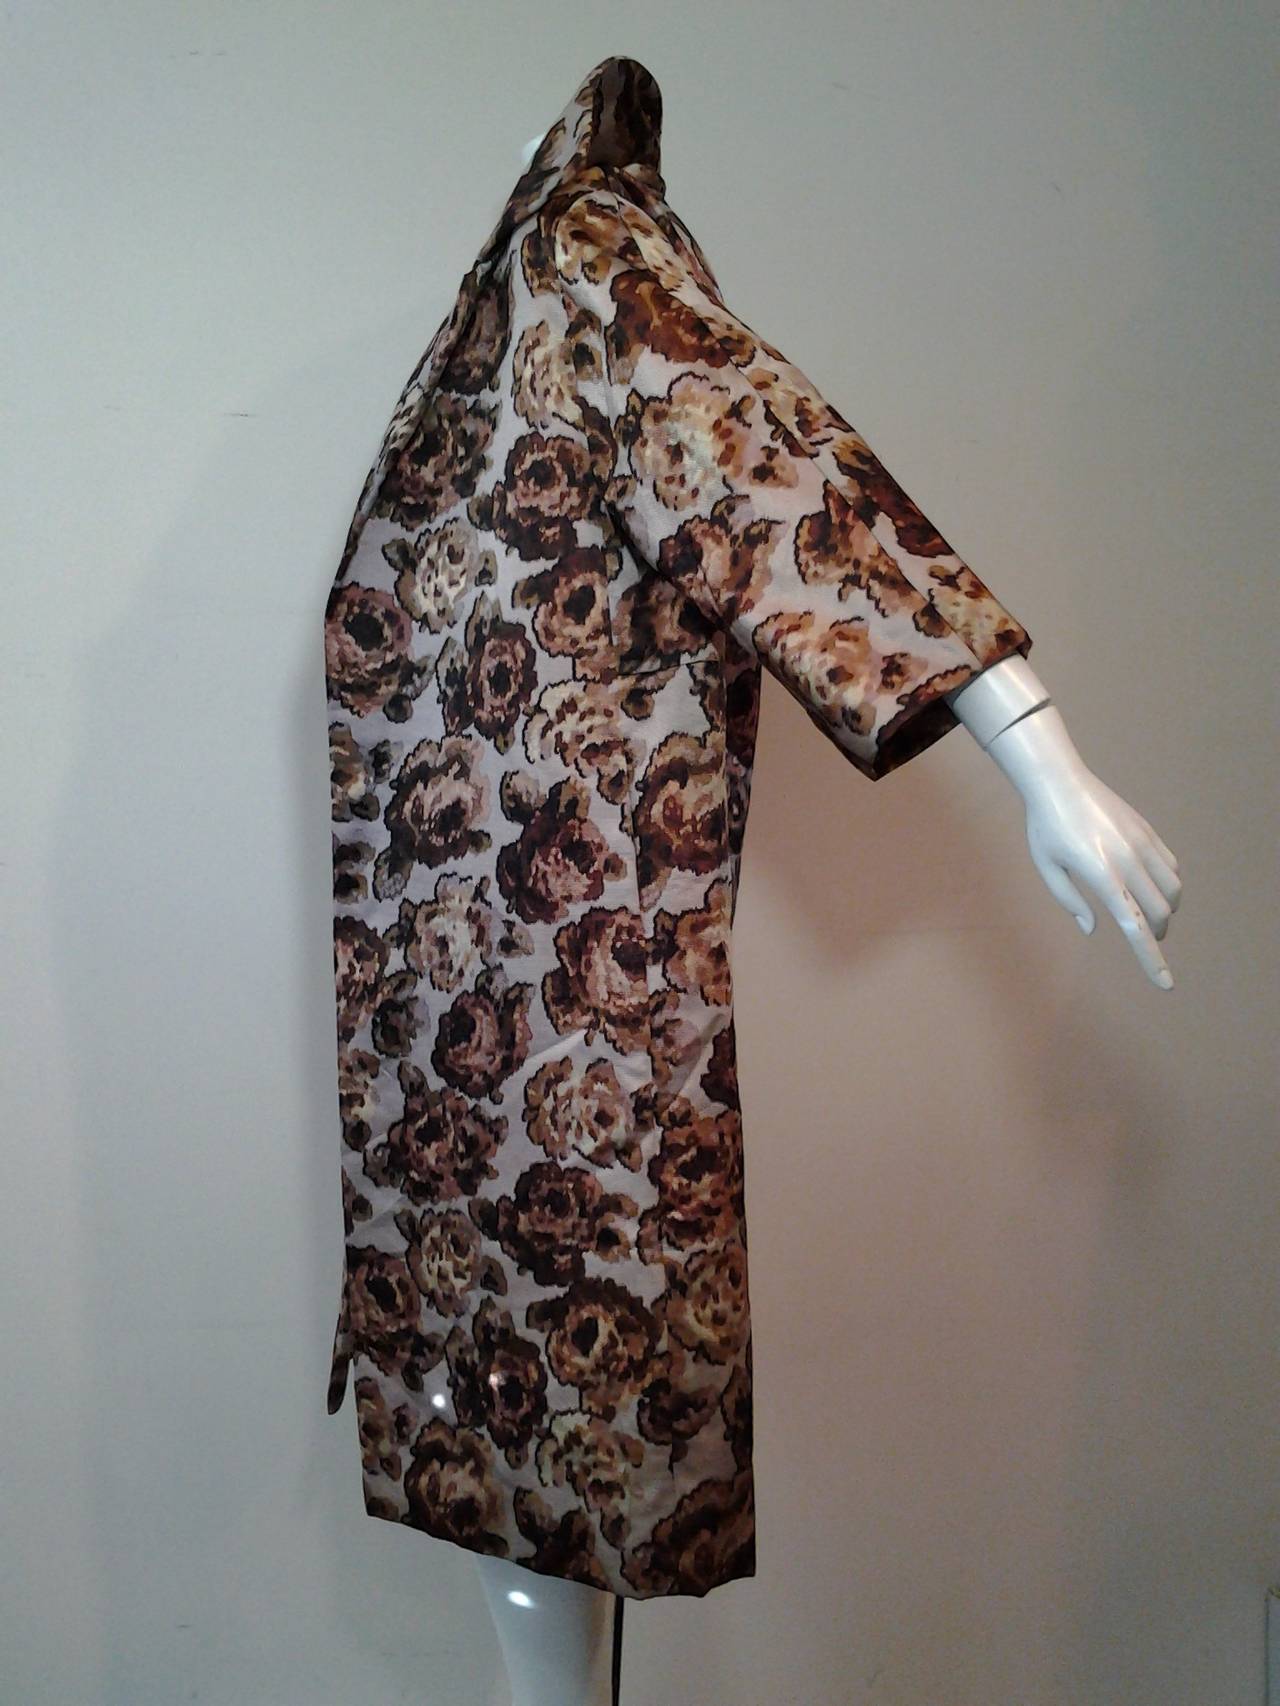 A wonderful 1950s Bonwit Teller silk floral faille evening coat.  No closures, 3/4 length sleeves, side seam pockets, notched collar.  Coat is lined with same fabric as outer fabric. 

Colors are muted gray violet background with brown and tan